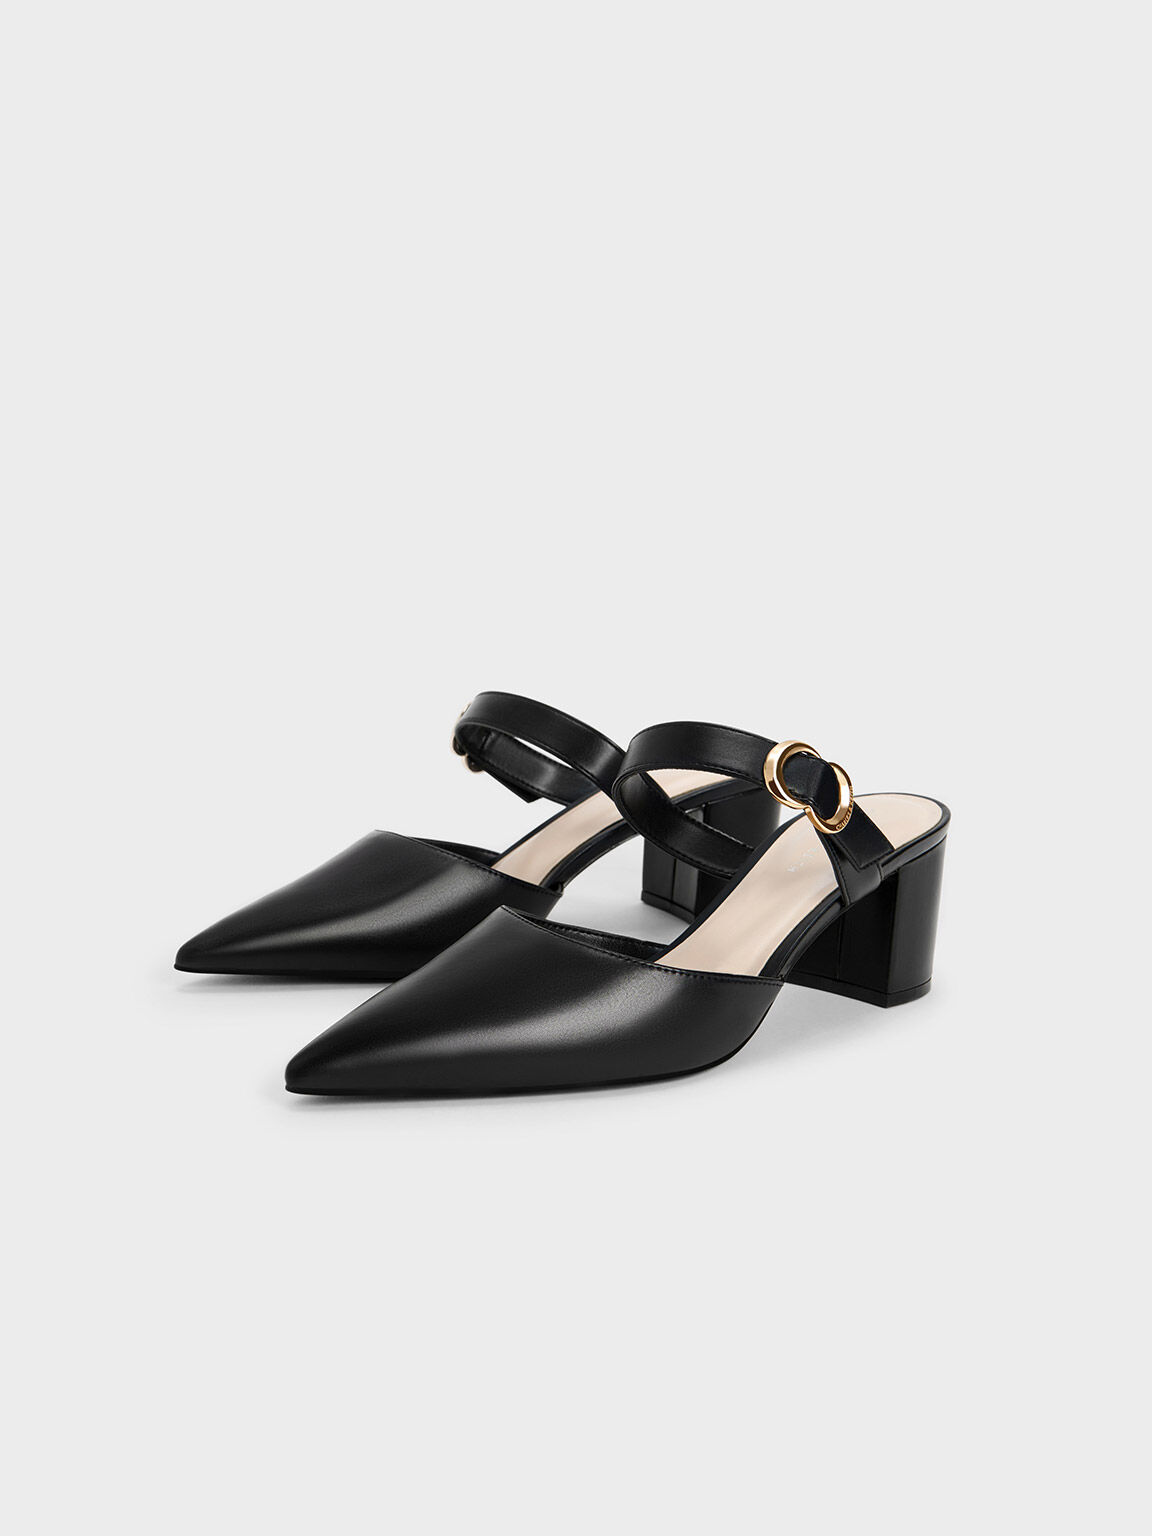 Women's Mules | Shop Exclusive Styles - CHARLES & KEITH SG